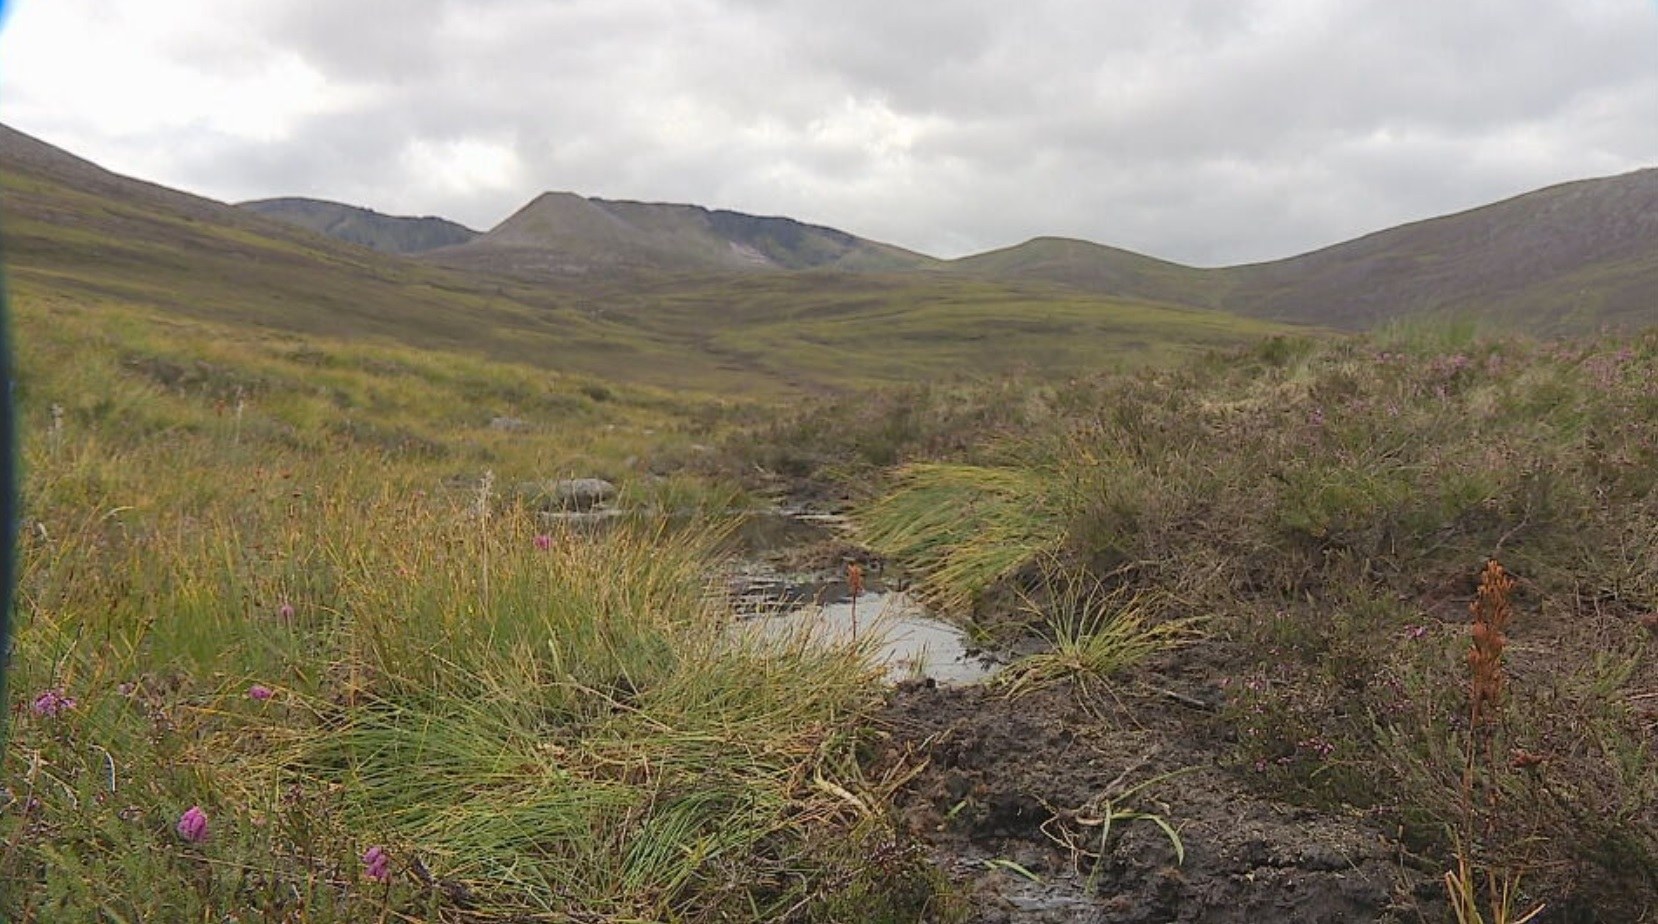 Peatland can help capture and store carbon 